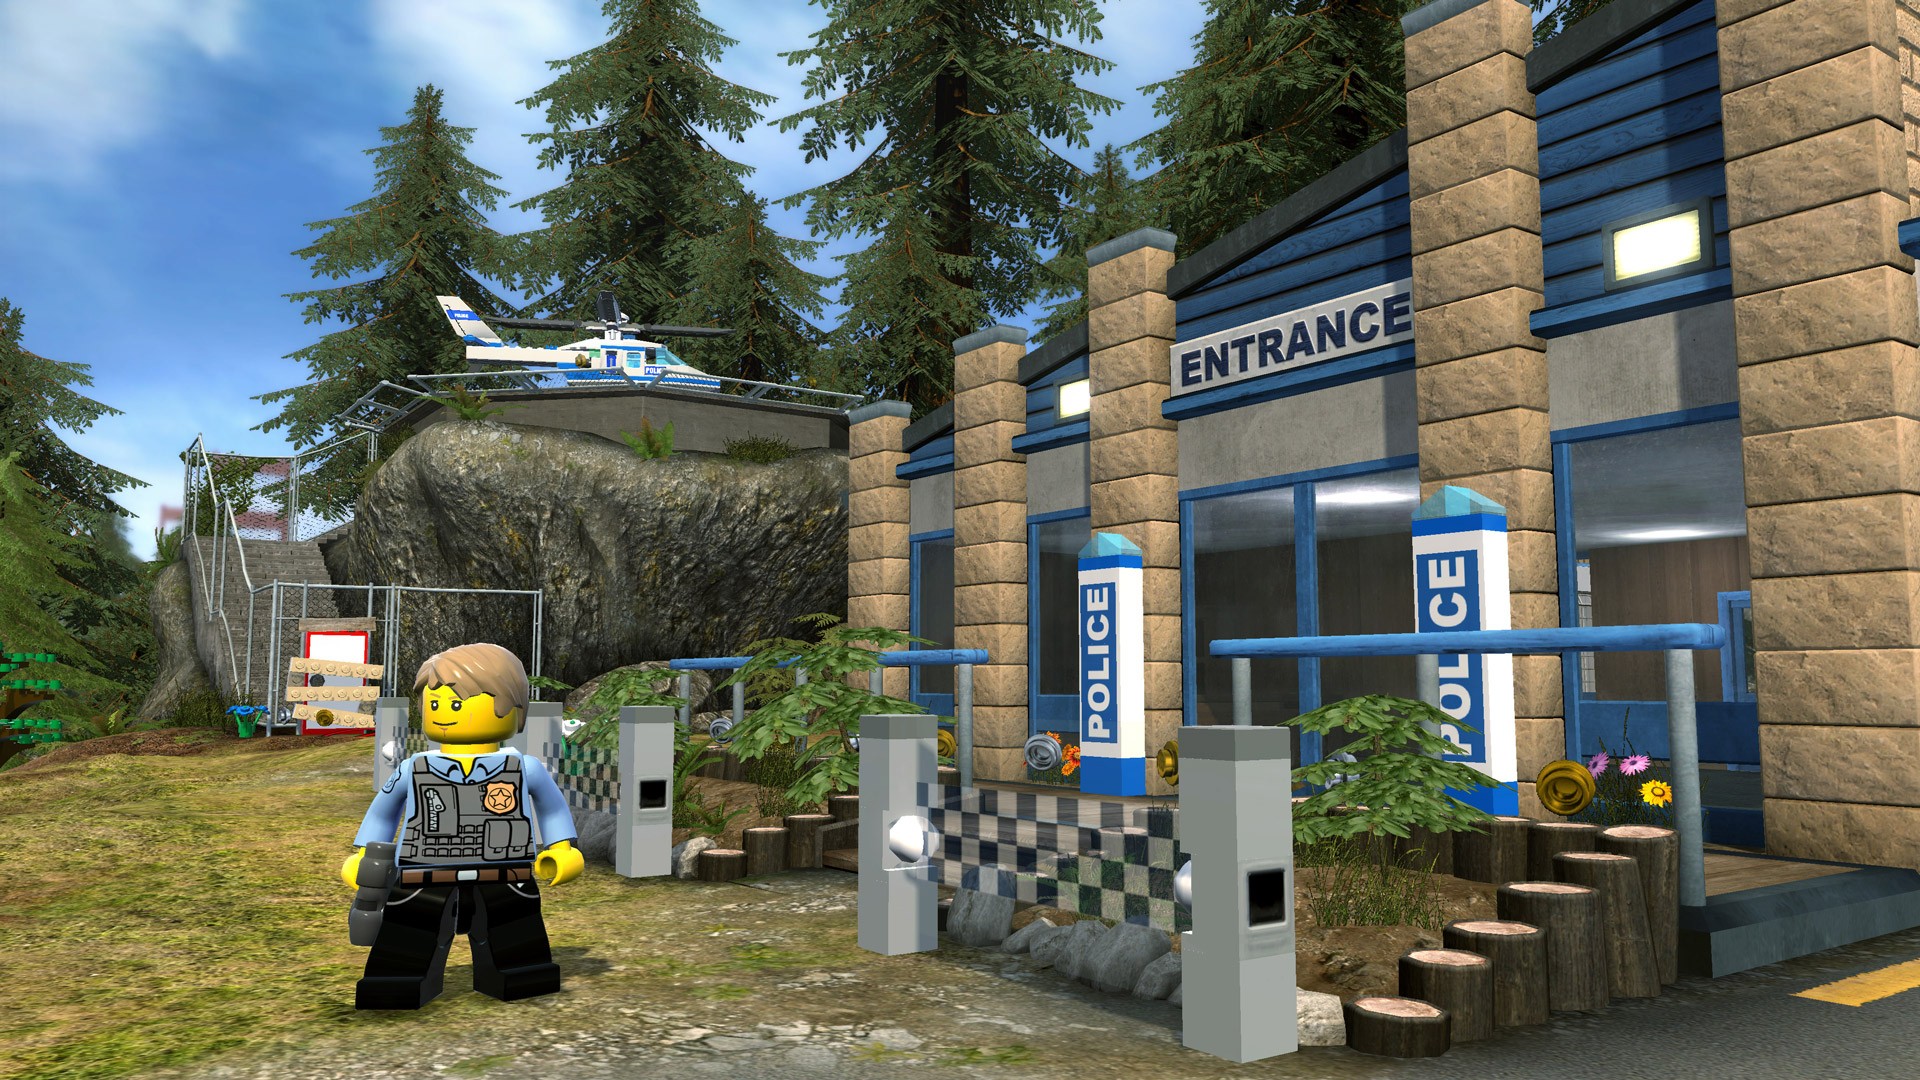 LEGO CITY UNDERCOVER SWITCH LEGO CITY UNDERCOVER - Instant comptant